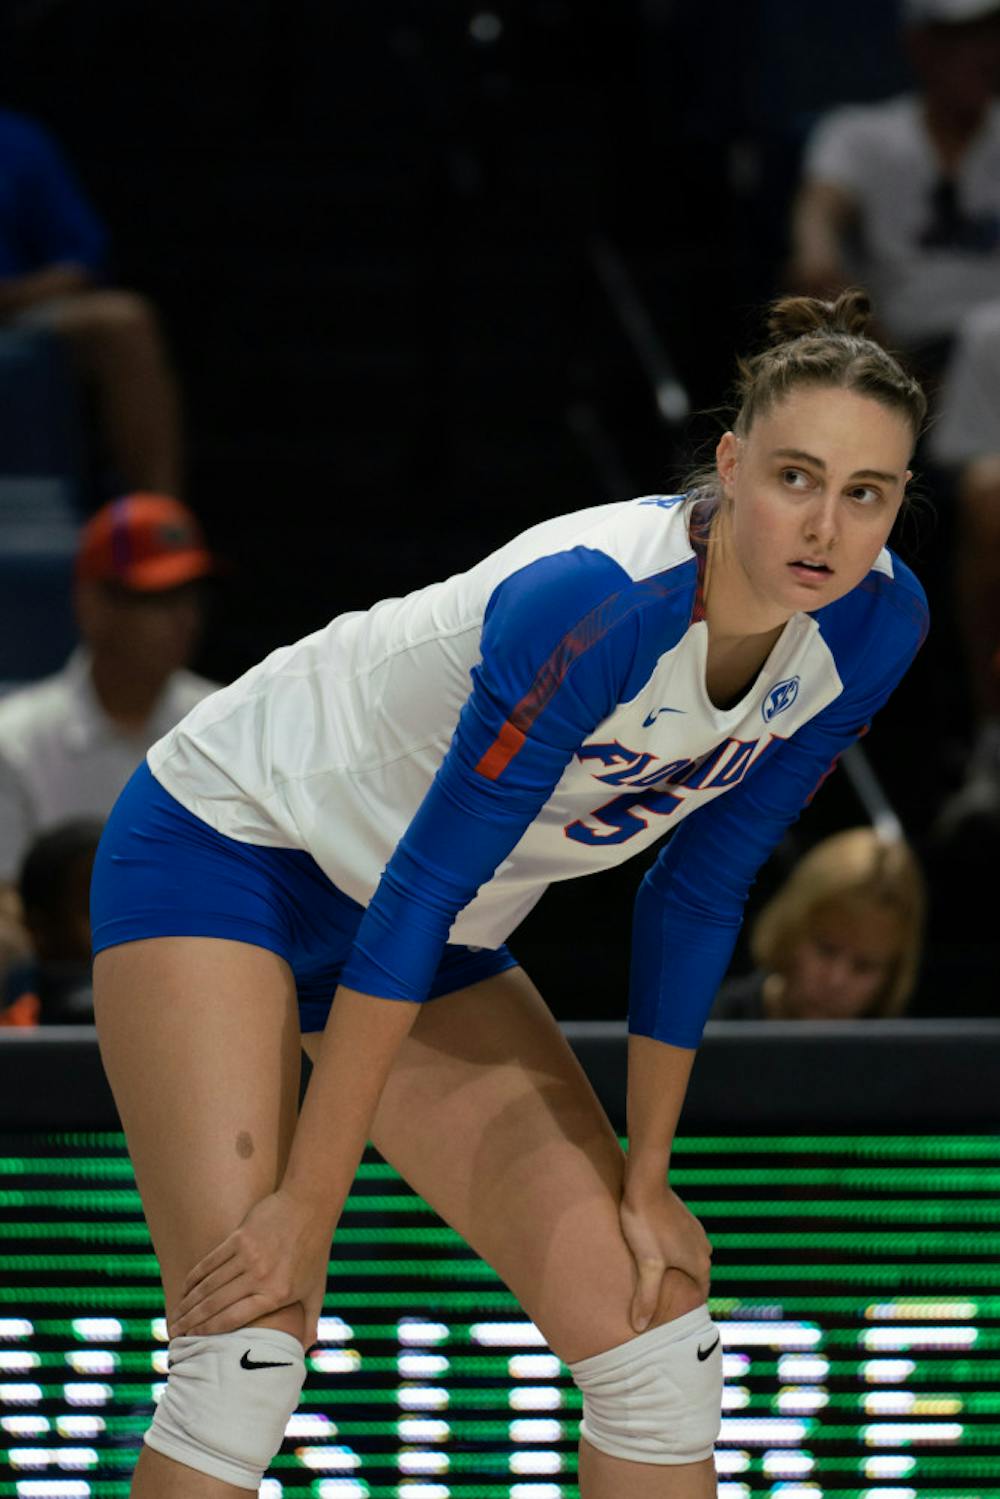 <p><span id="docs-internal-guid-c3532faf-7fff-98df-2751-cb53bdb7d948"><span>Middle blockers Rachael Kramer (pictured) and Taelor Kellum combined for 22 kills in Florida’s sweep over Alabama.</span></span></p>